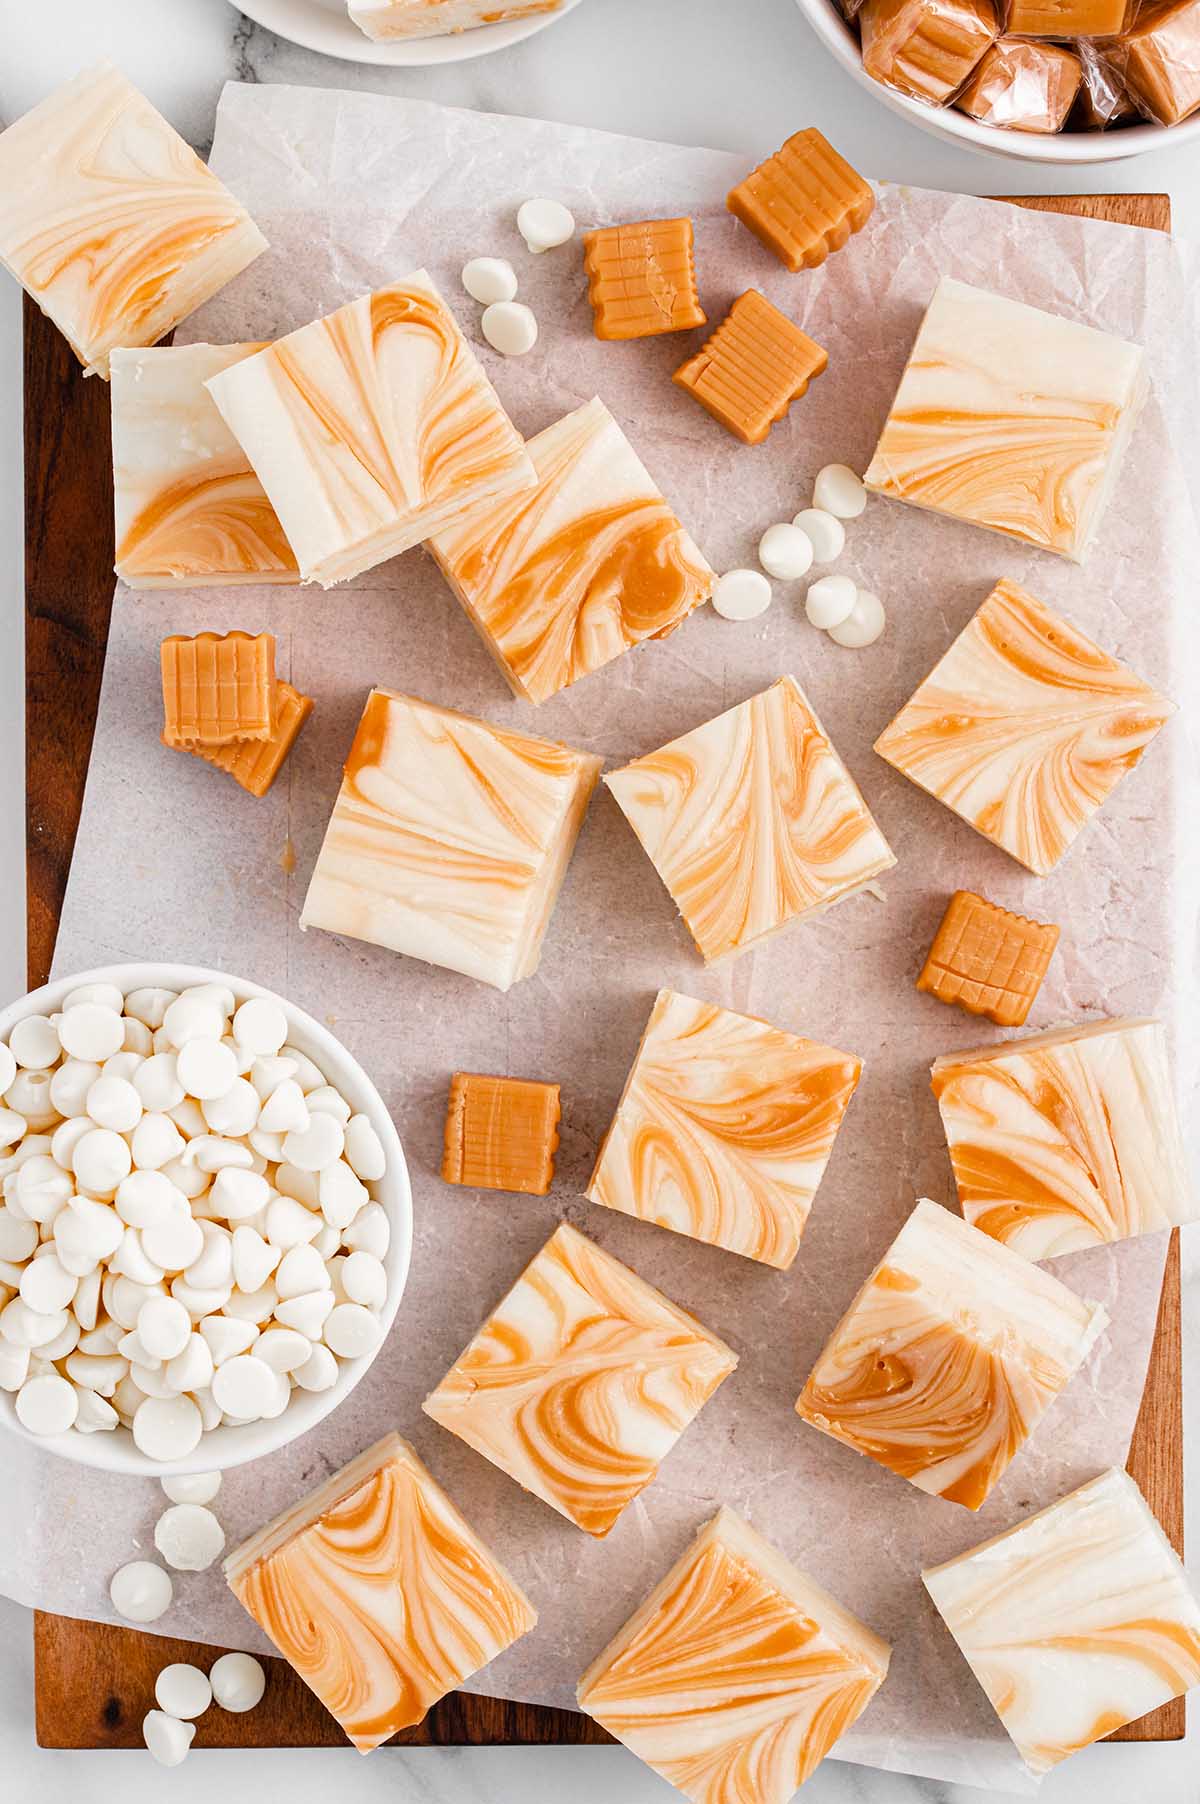 White Chocolate Caramel Fudge on top of wooden board with white chips in a bowl.